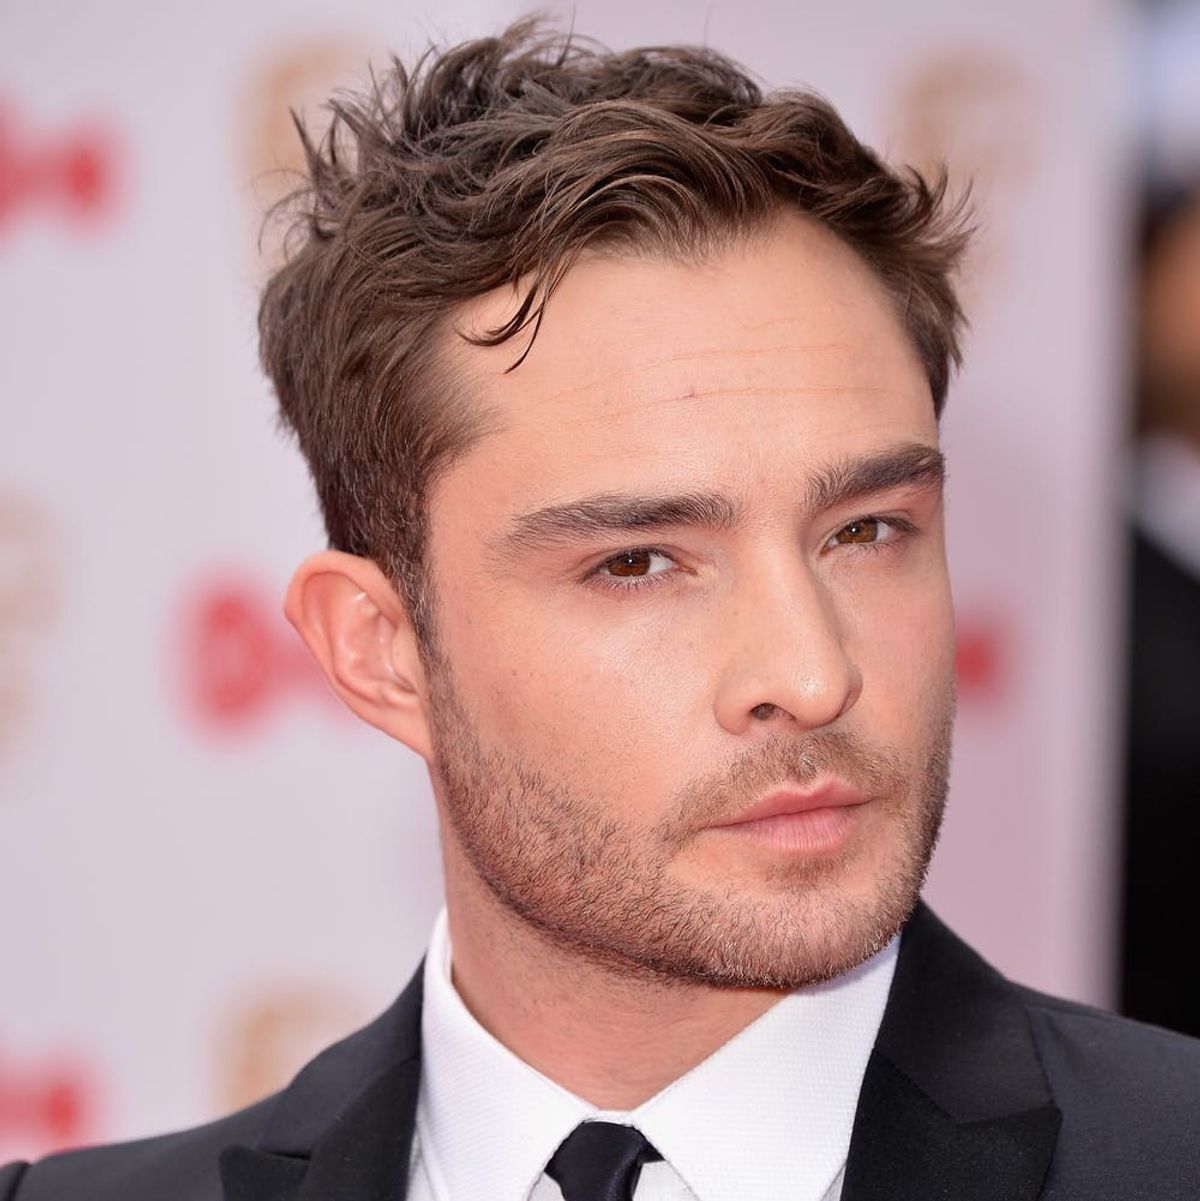 “Gossip Girl” Star Ed Westwick Accused of Sexual Assault by Actress Kristina Cohen